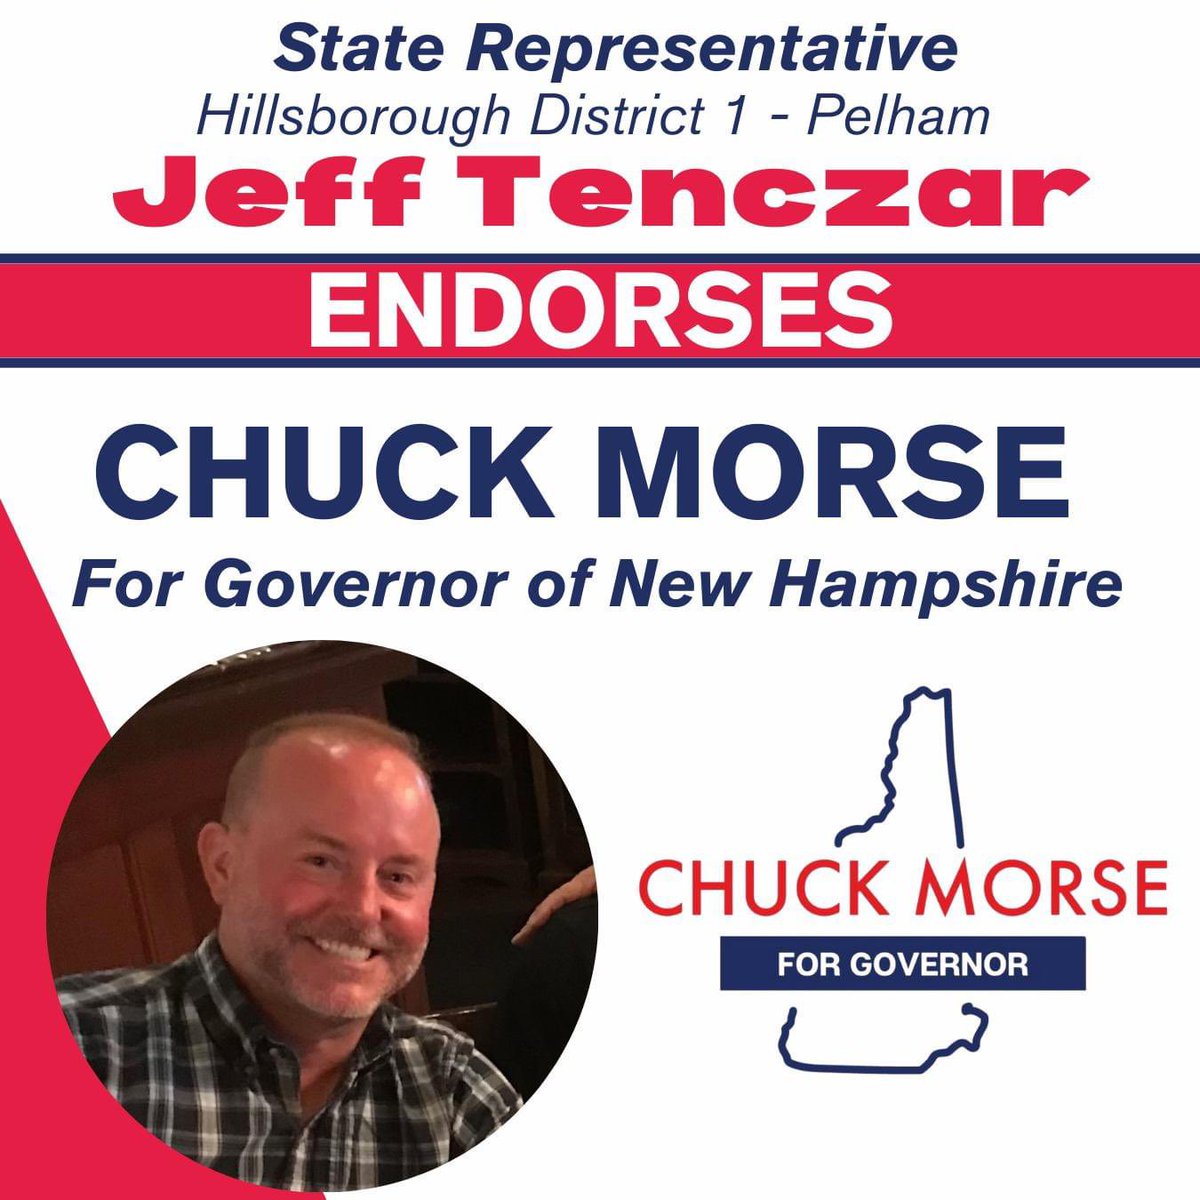 Endorsement Alert 📣 State Representative Jeff Tenczar, a lifelong Pelham resident, retired NH state trooper, and former Special Education teacher, has endorsed our campaign for Governor! #nhgov #nhpolitics #teammorse